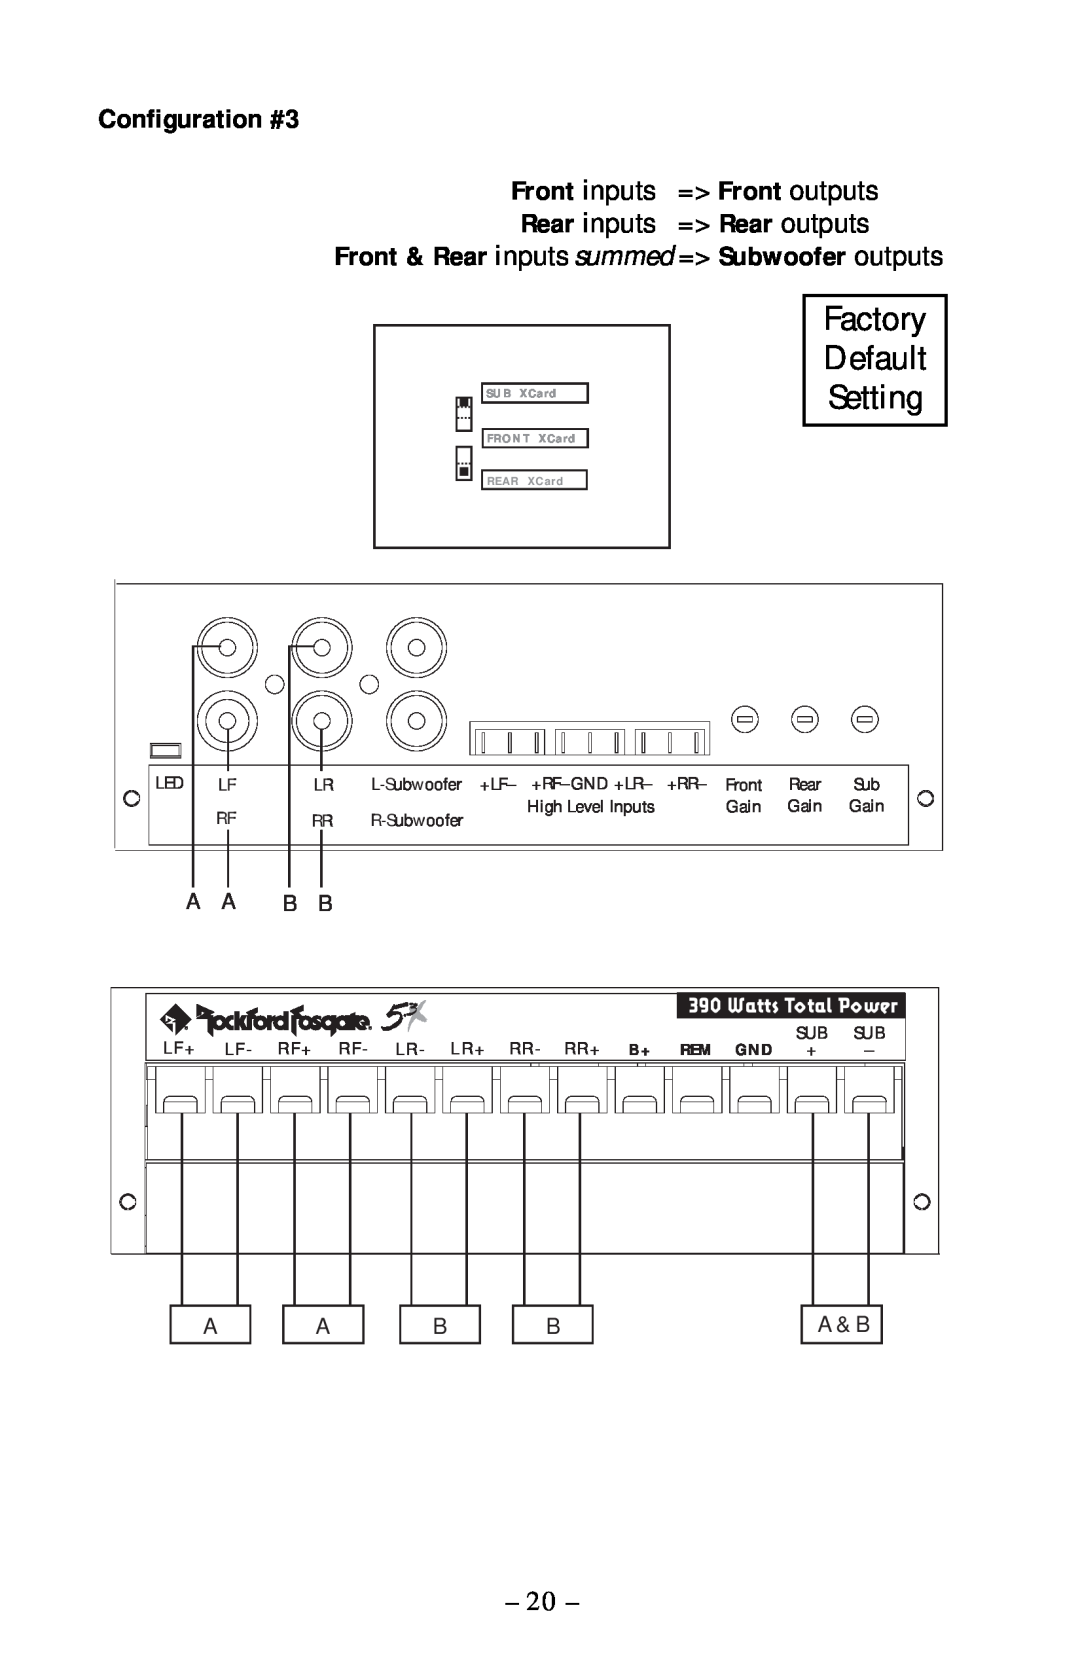 Rockford Fosgate 5.3x manual Factory, Default, Setting, Configuration #3, Front & Rear inputs summed = Subwoofer outputs 